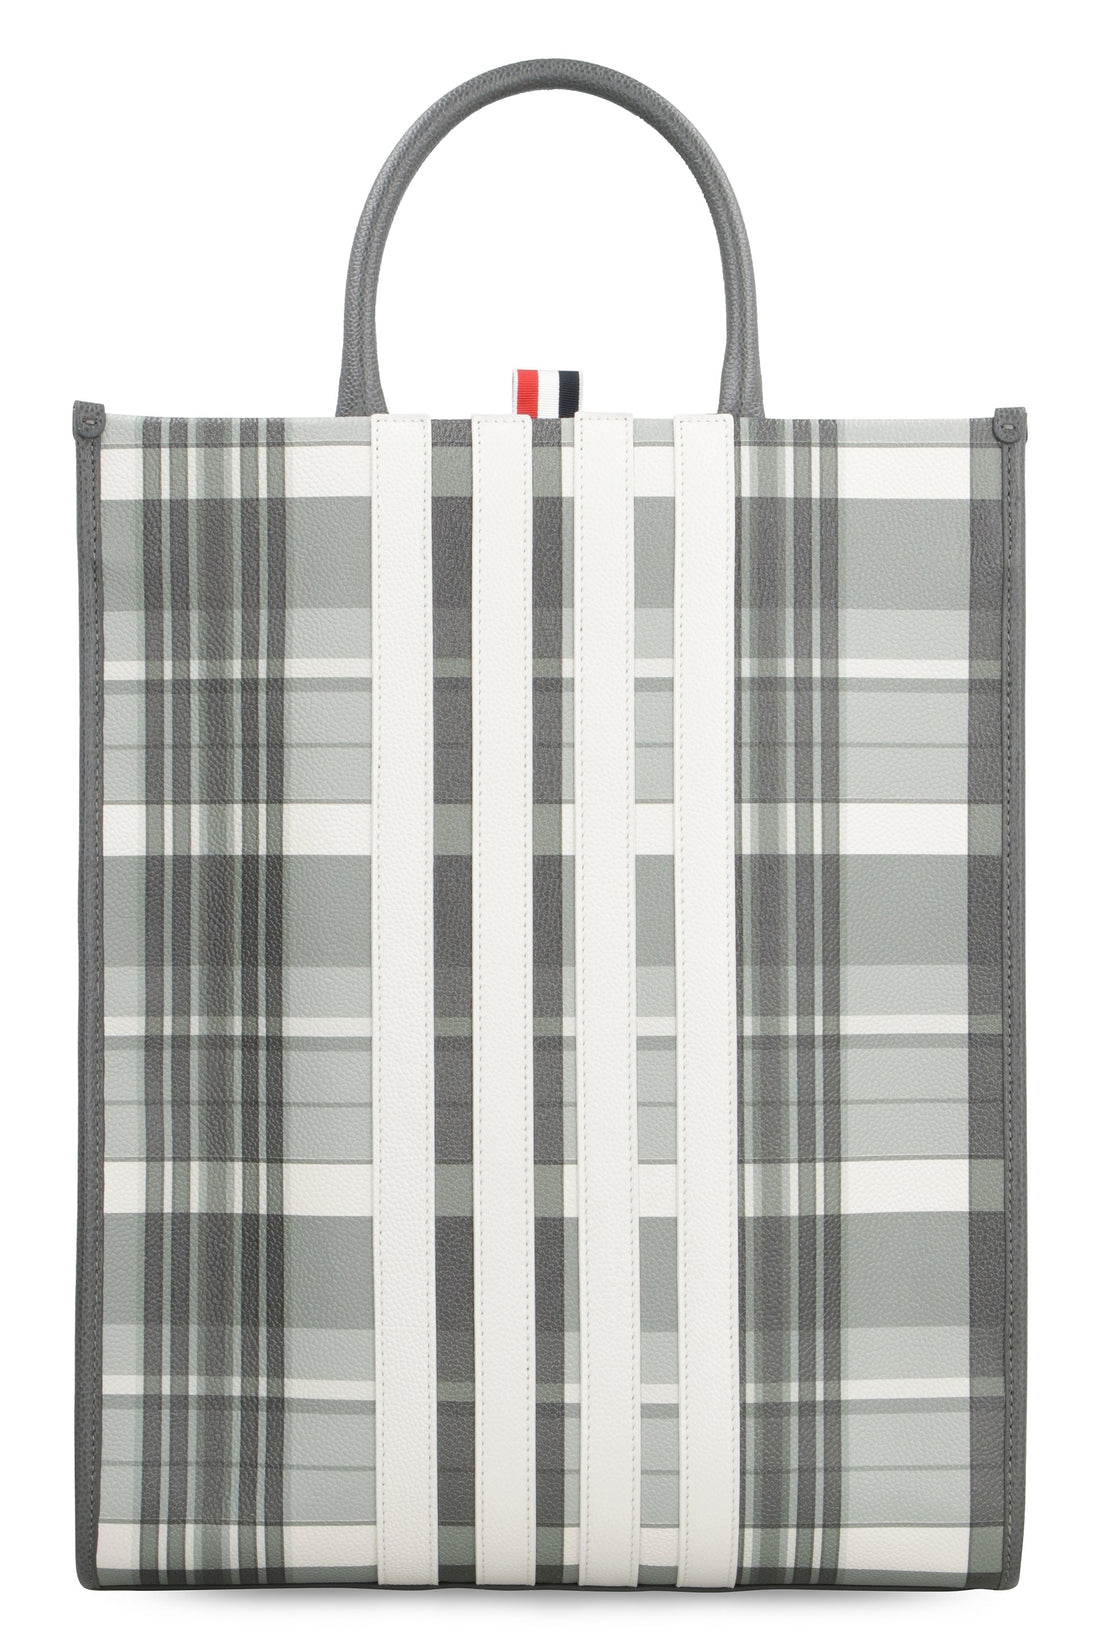 Thom Browne-OUTLET-SALE-Vertical leather tote-ARCHIVIST